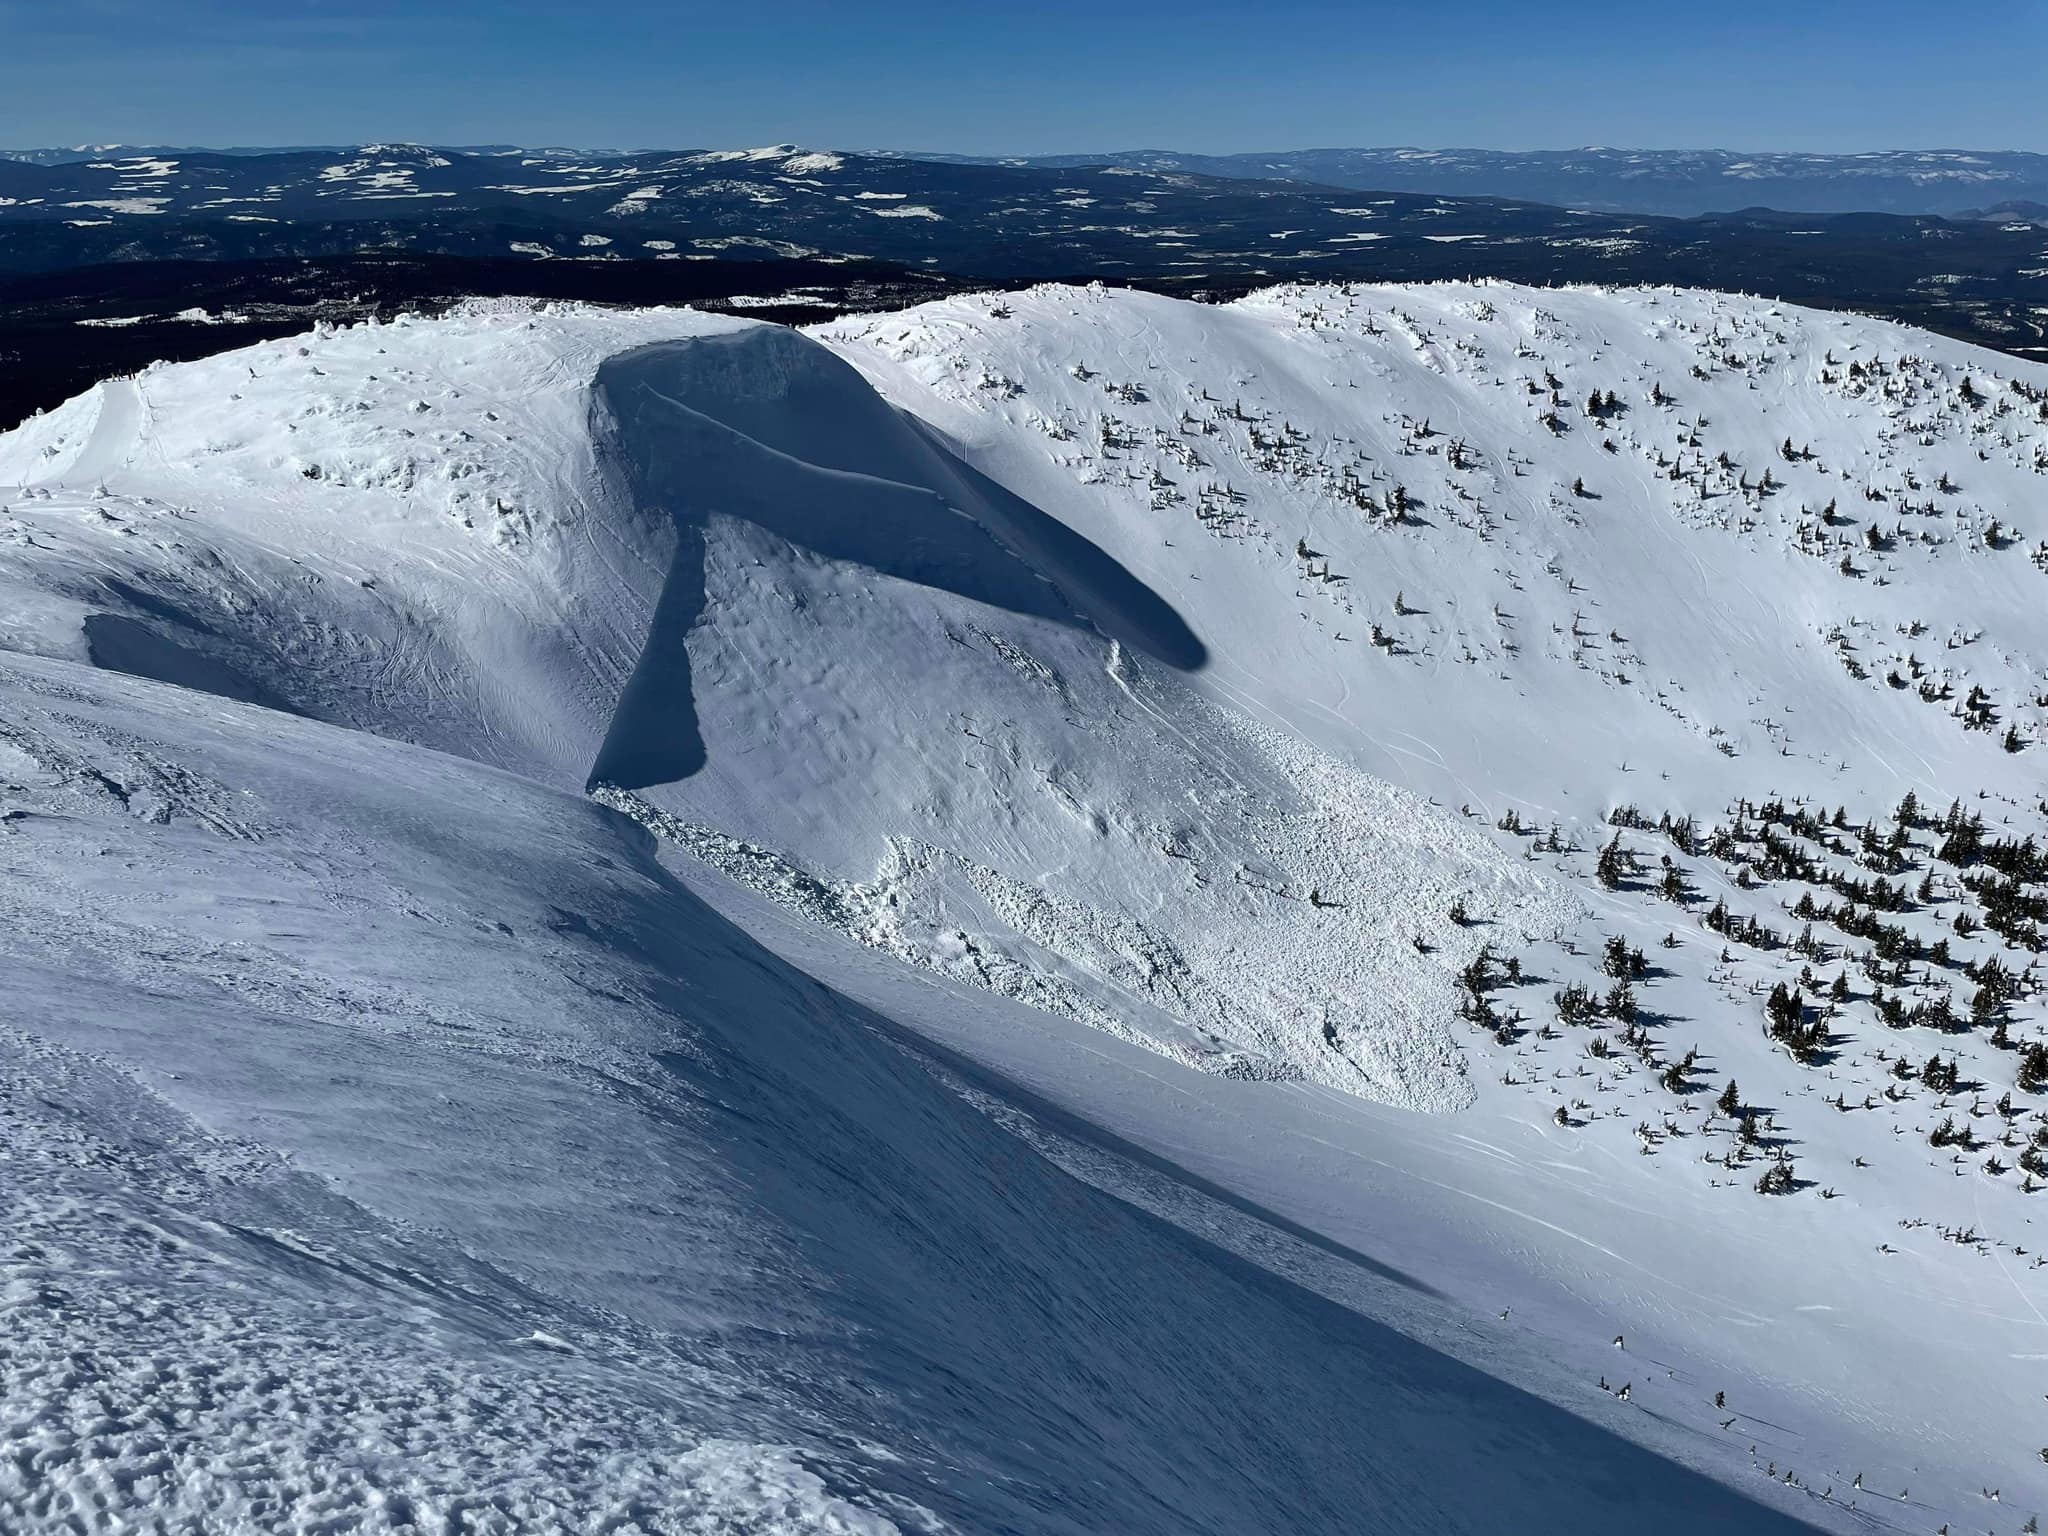 Out-of-bounds avalanche at Big White Ski Resort